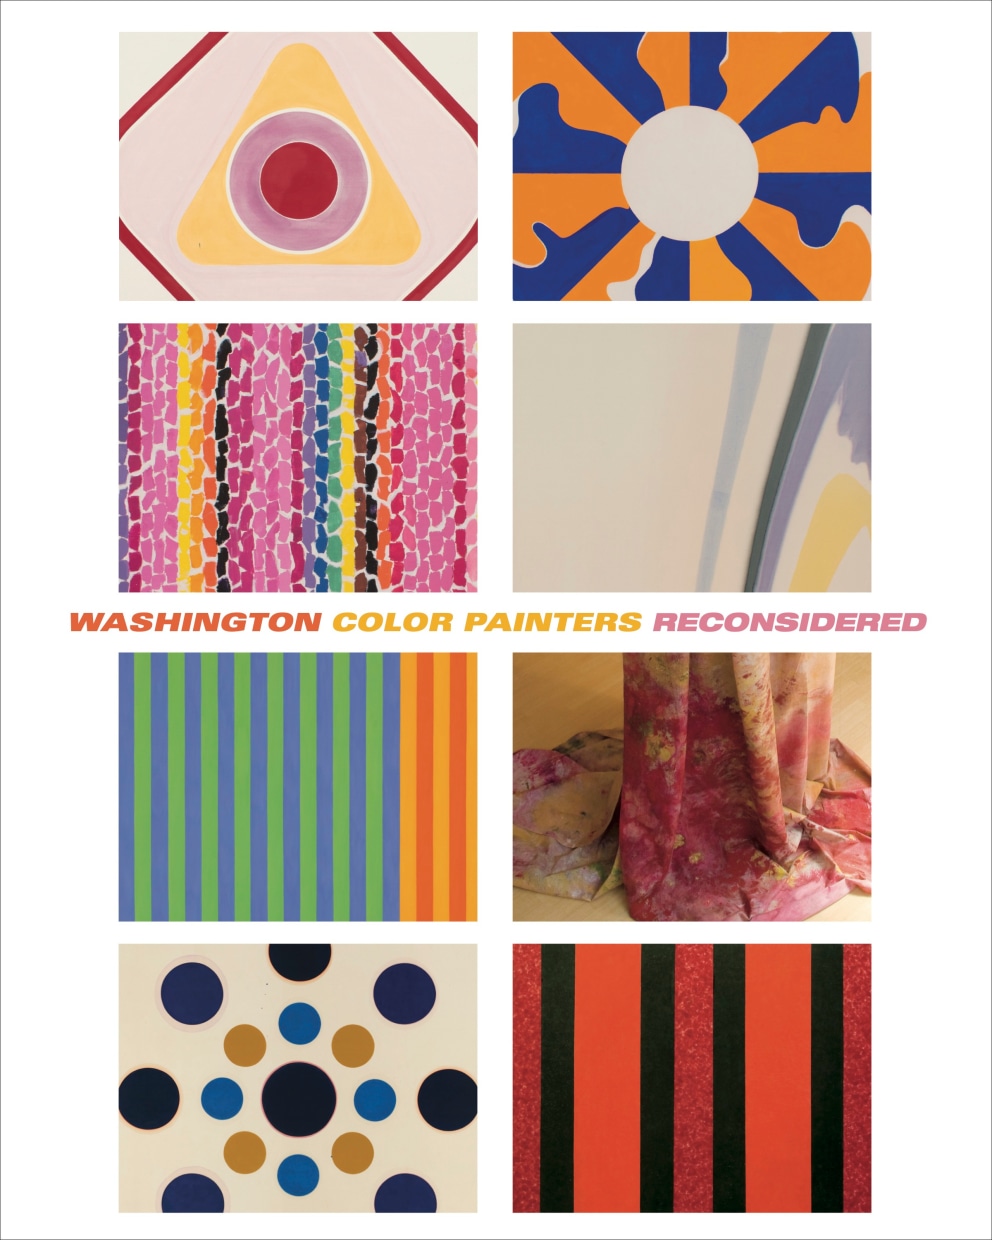 Washington Color Painters Reconsidered